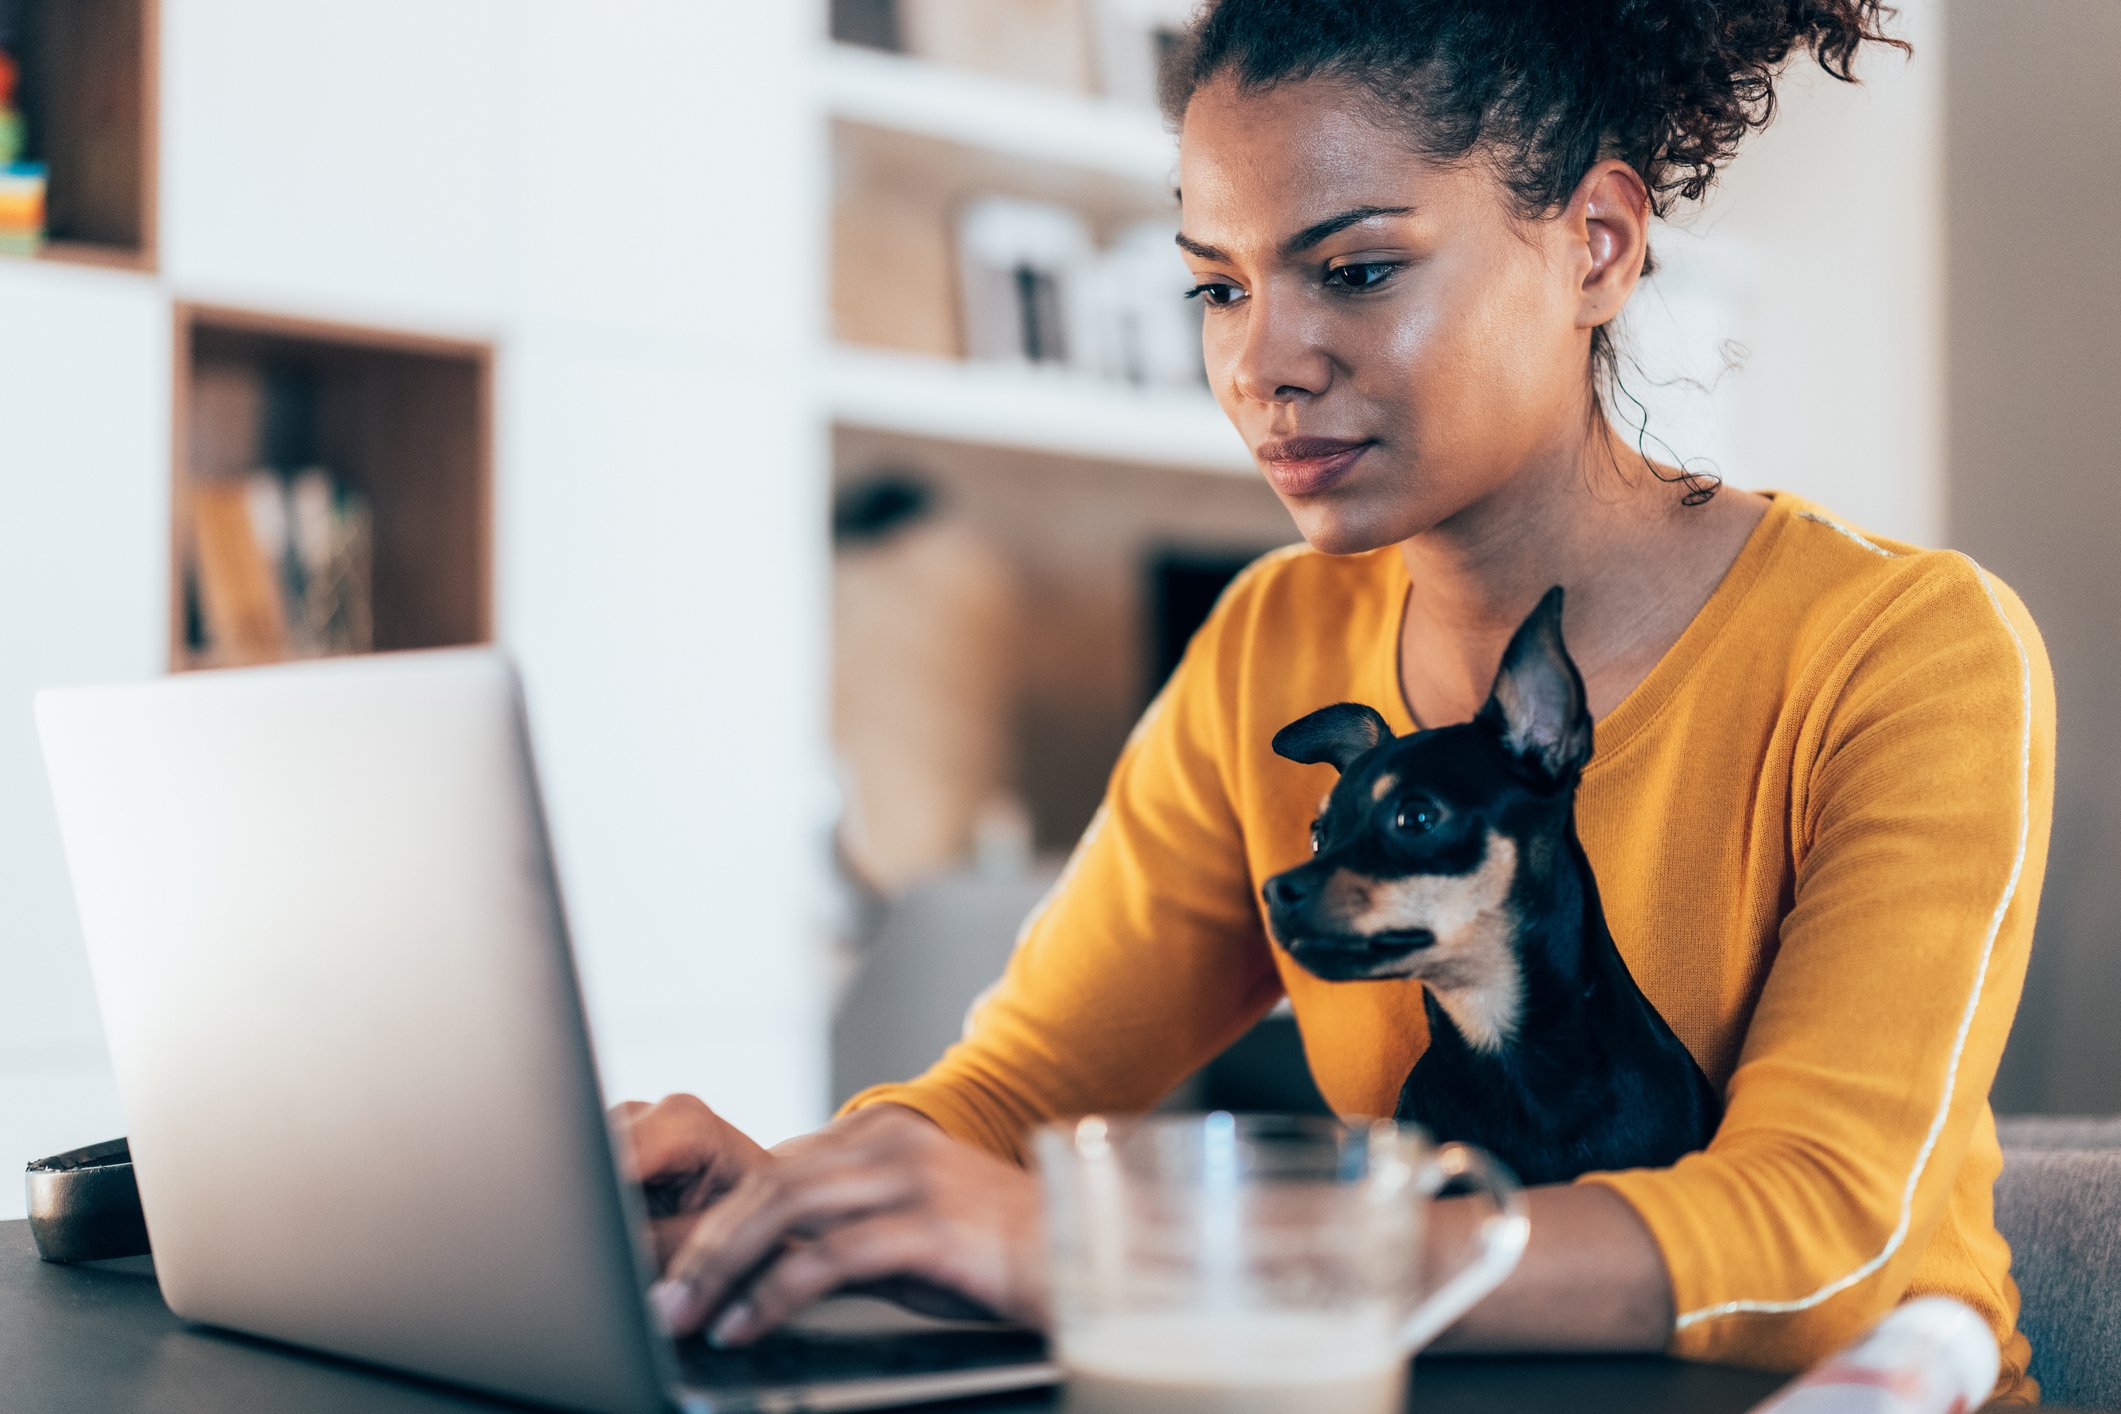 Image of woman with little dog on her lap sitting in front of her laptop